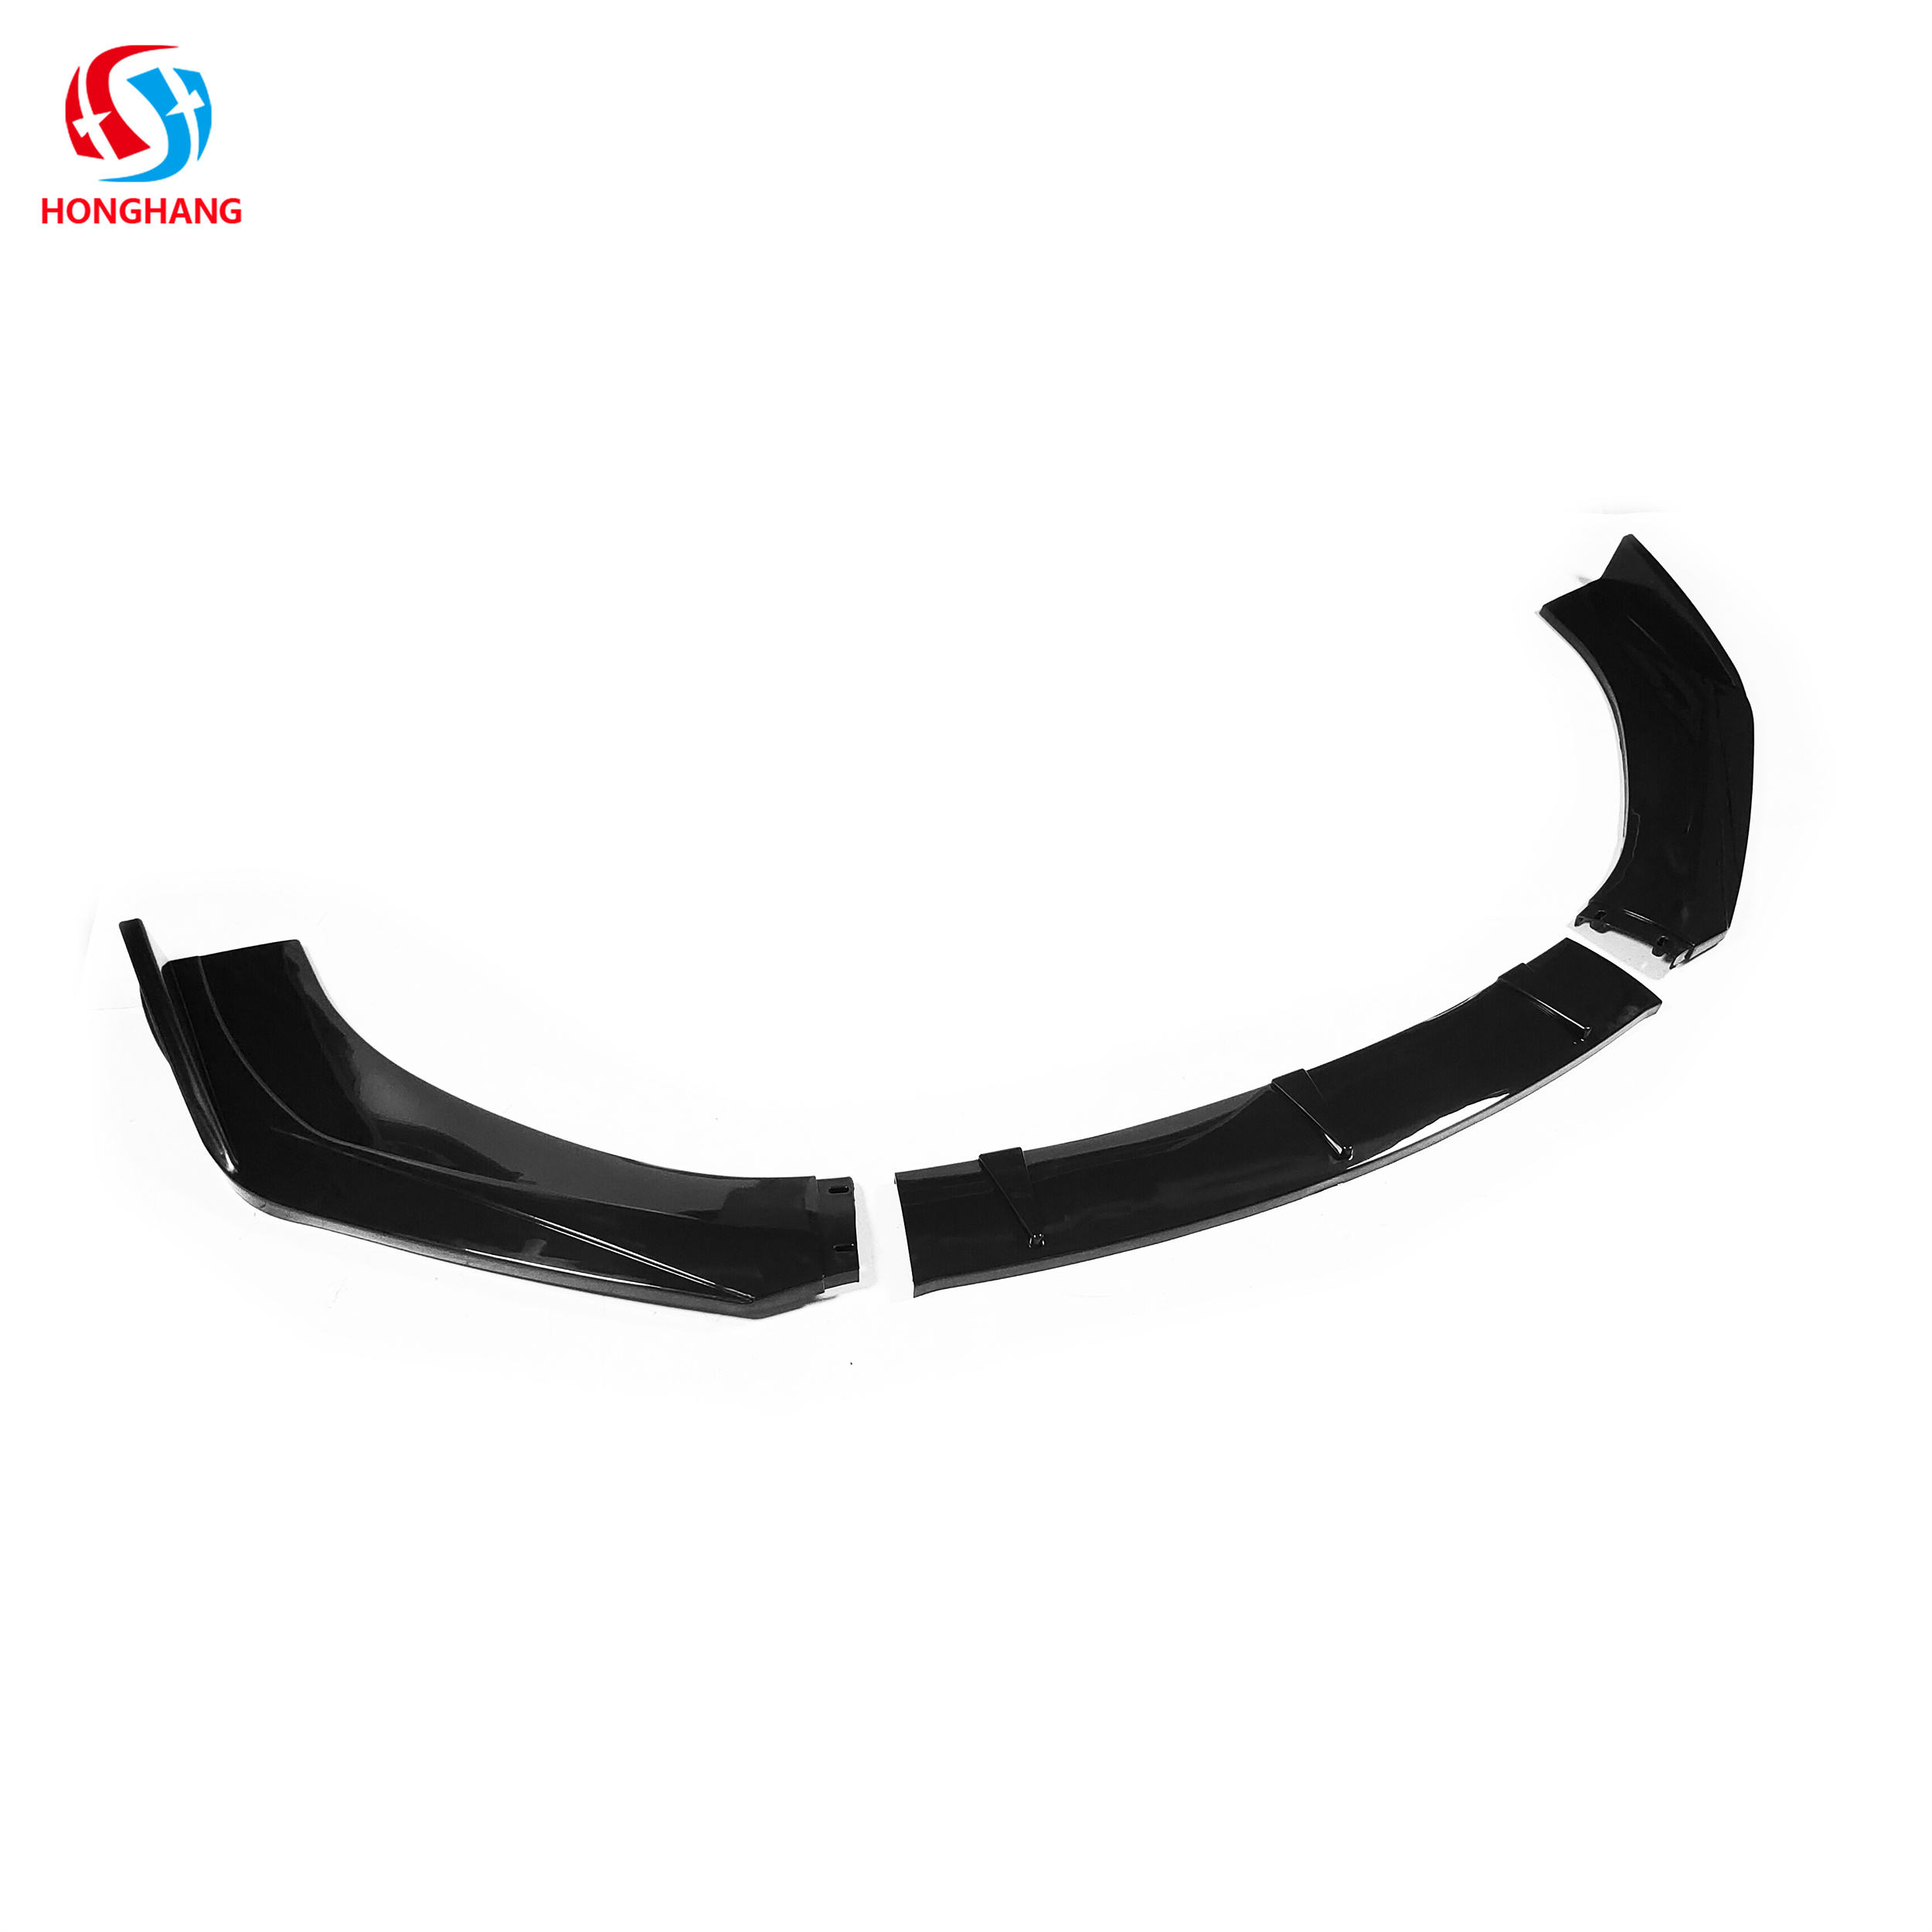 3-stages Type G Universal Front bumper Lip For All Cars 